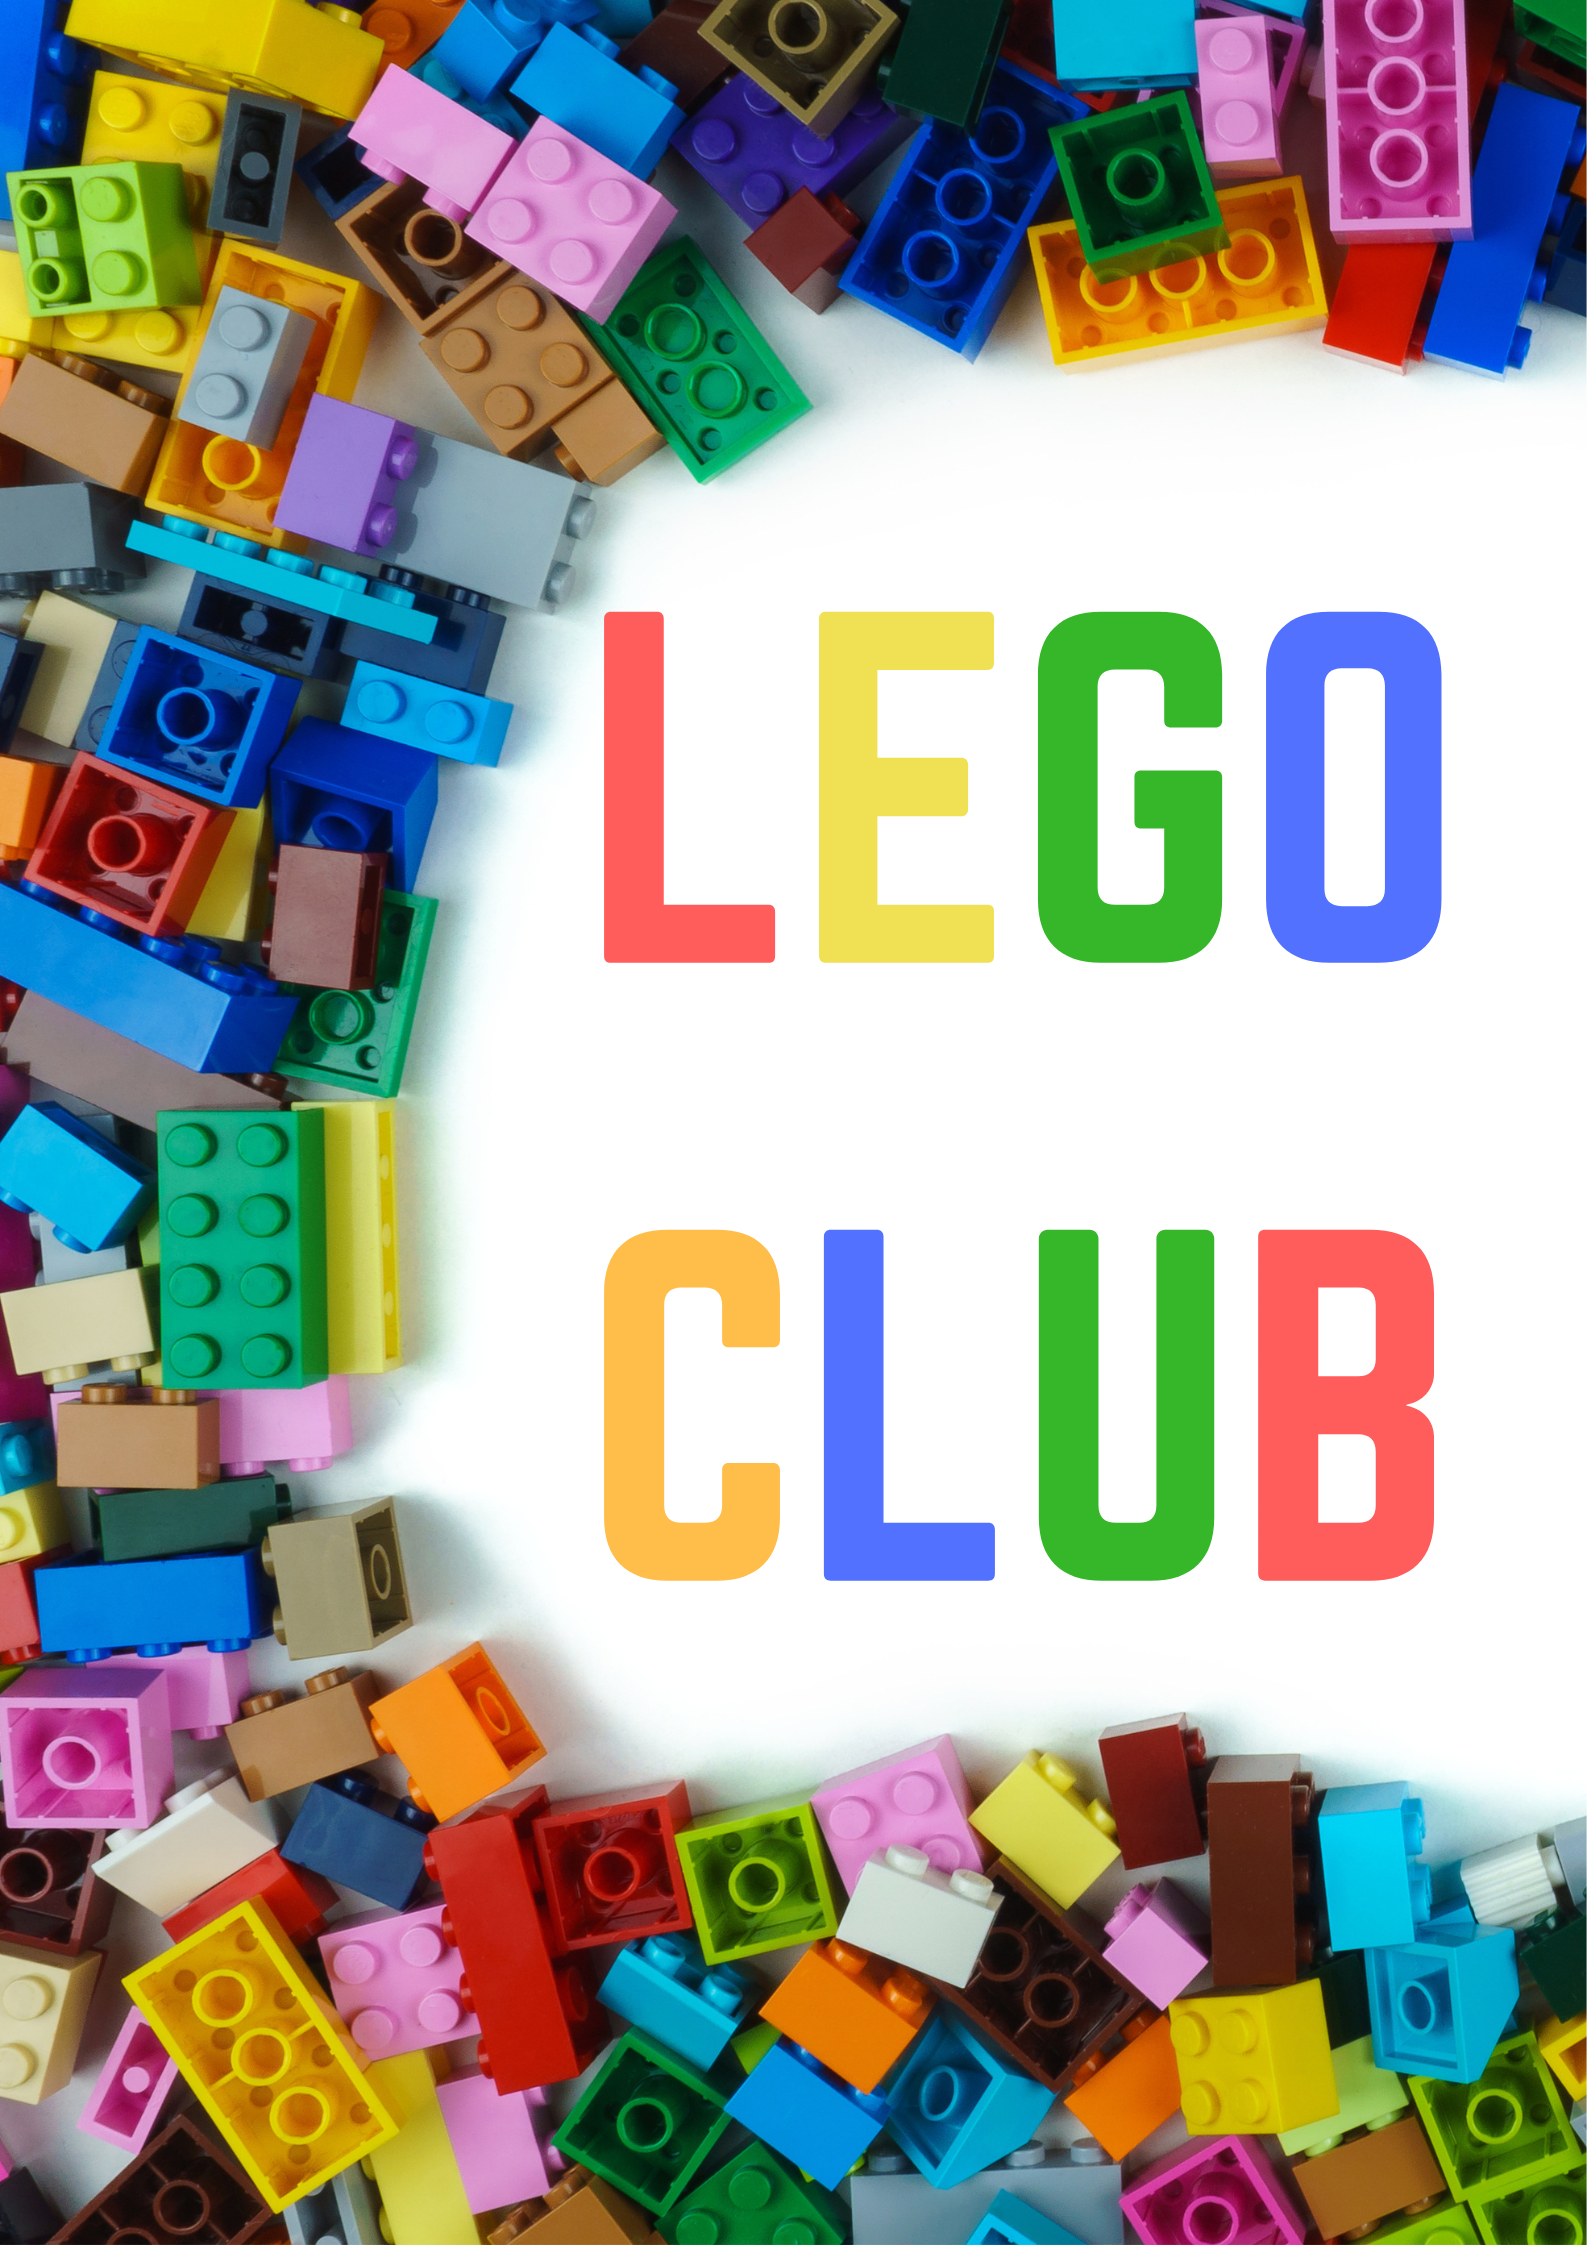 LEGO Club with LEGOs surrounding the text